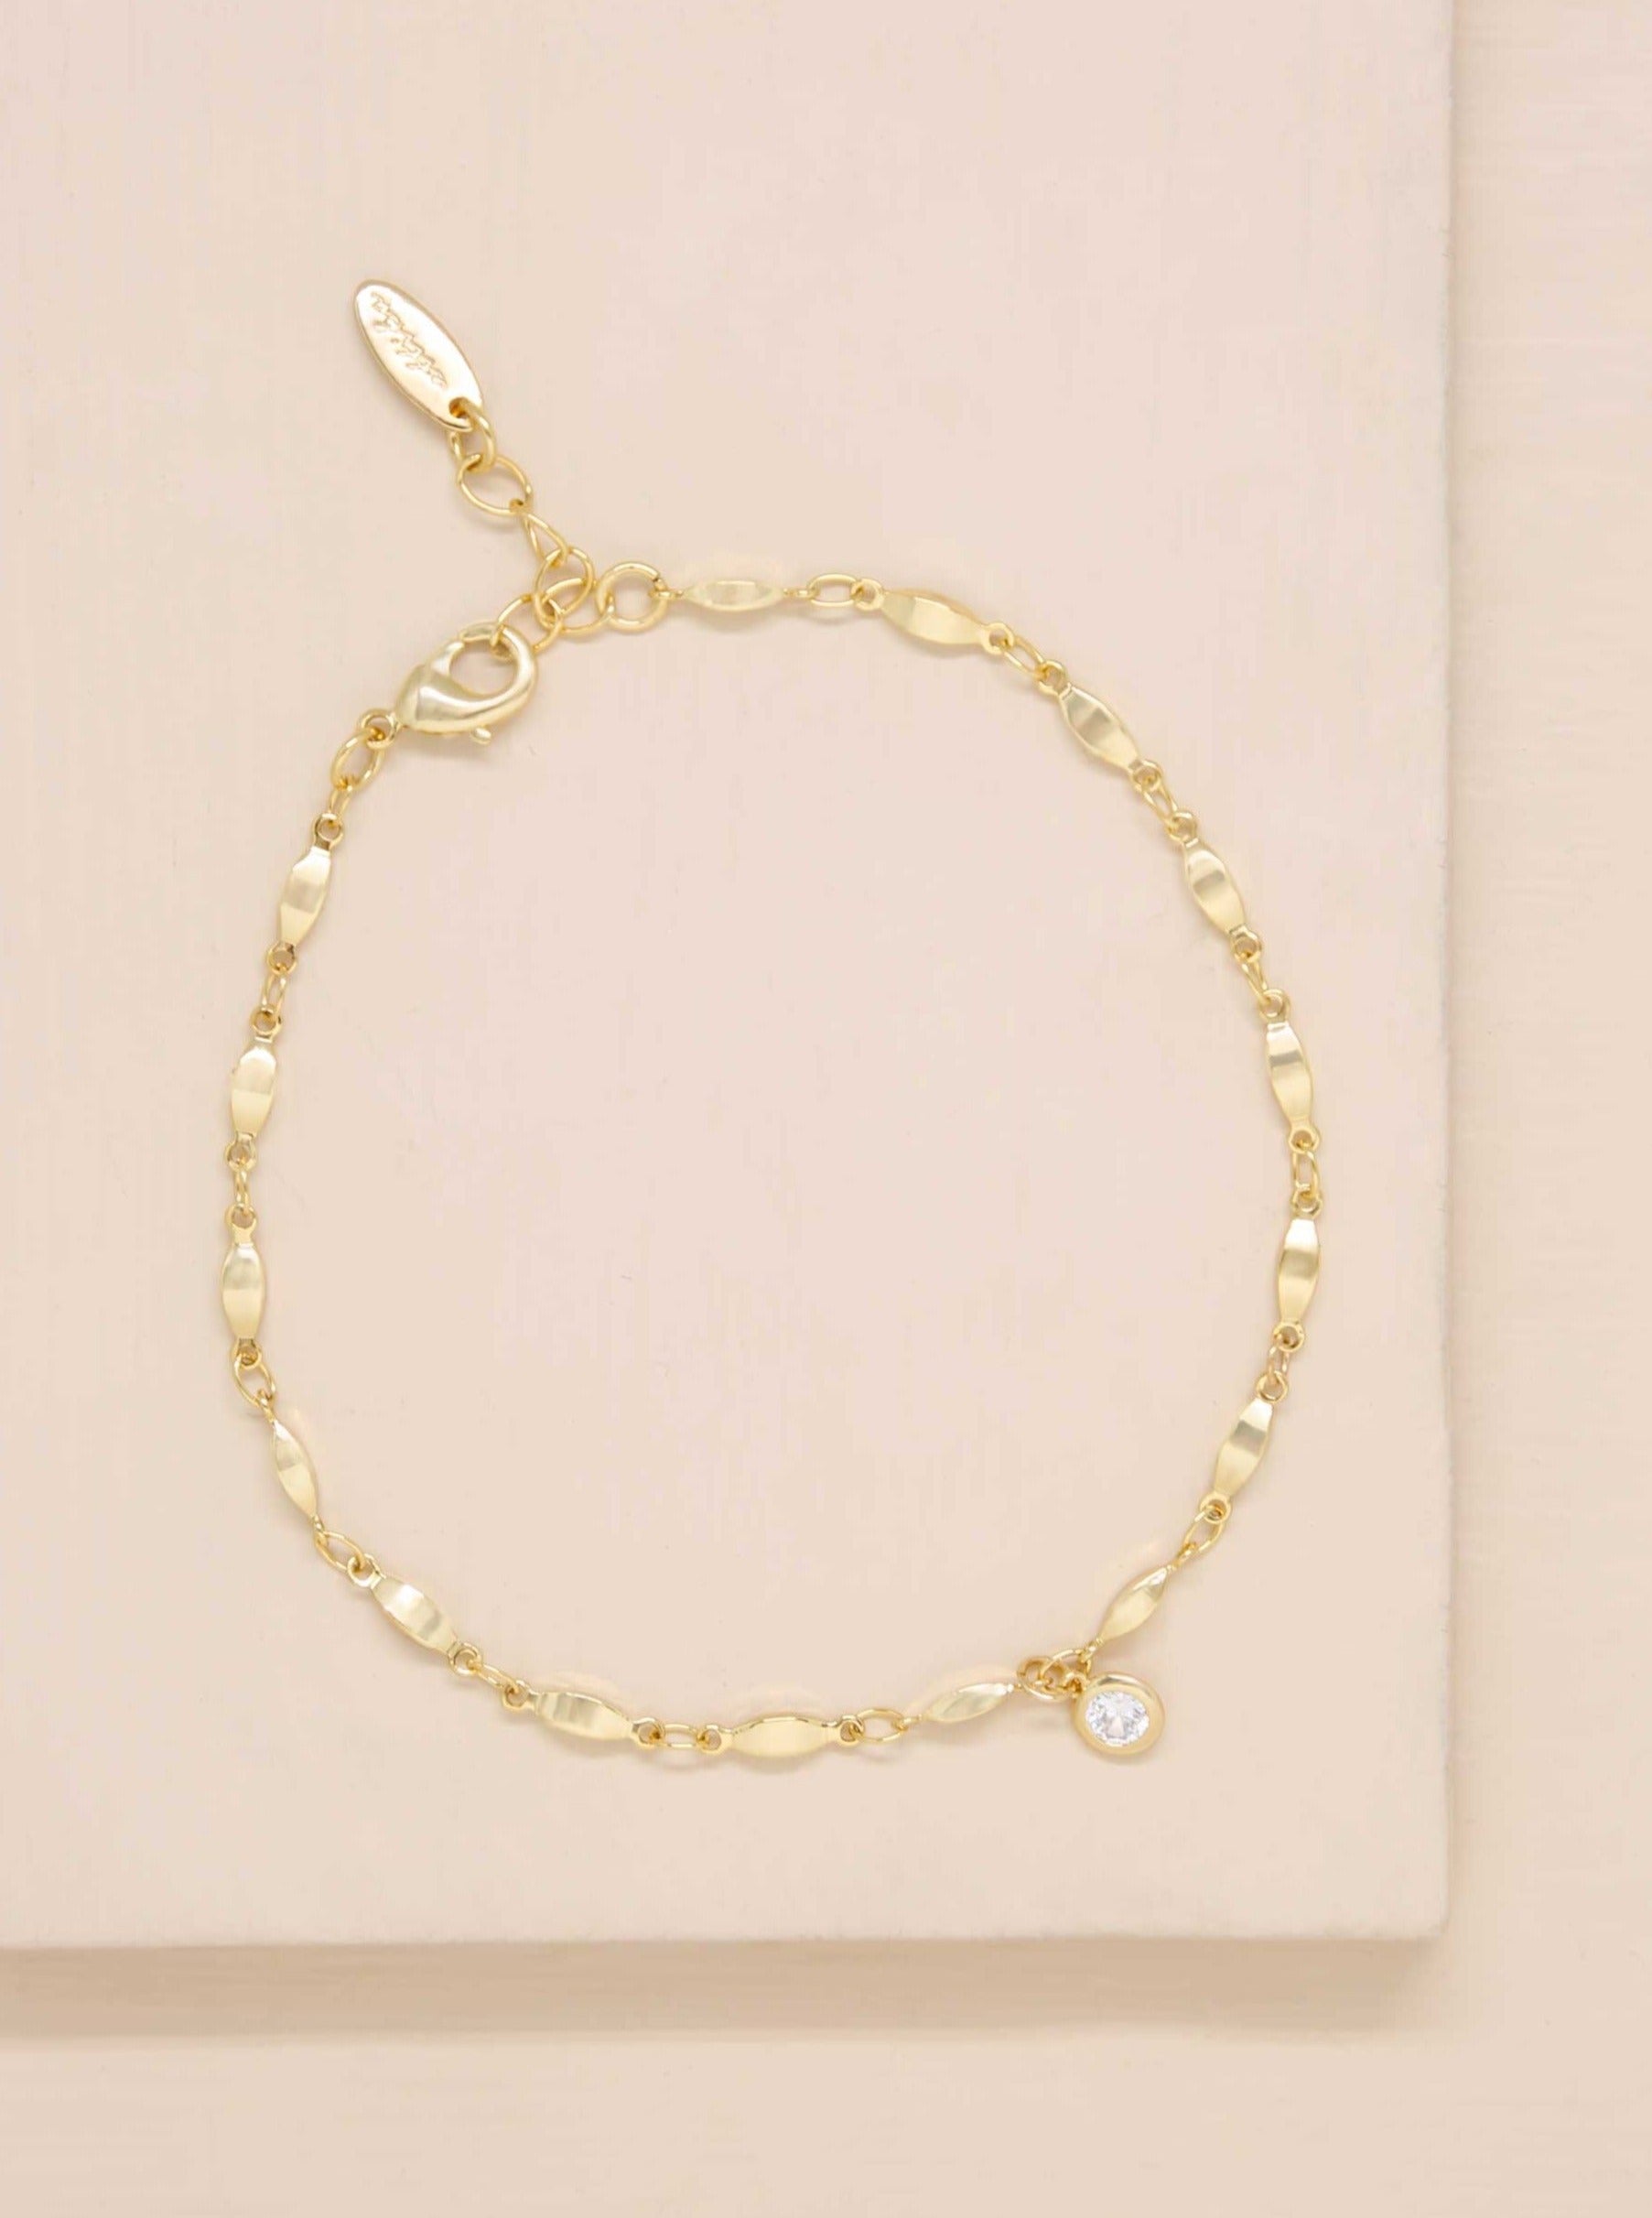 ettika anklet 18K GOLD PLATED DAY DREAMER WITH CRYSTAL CHARM // ANKLET